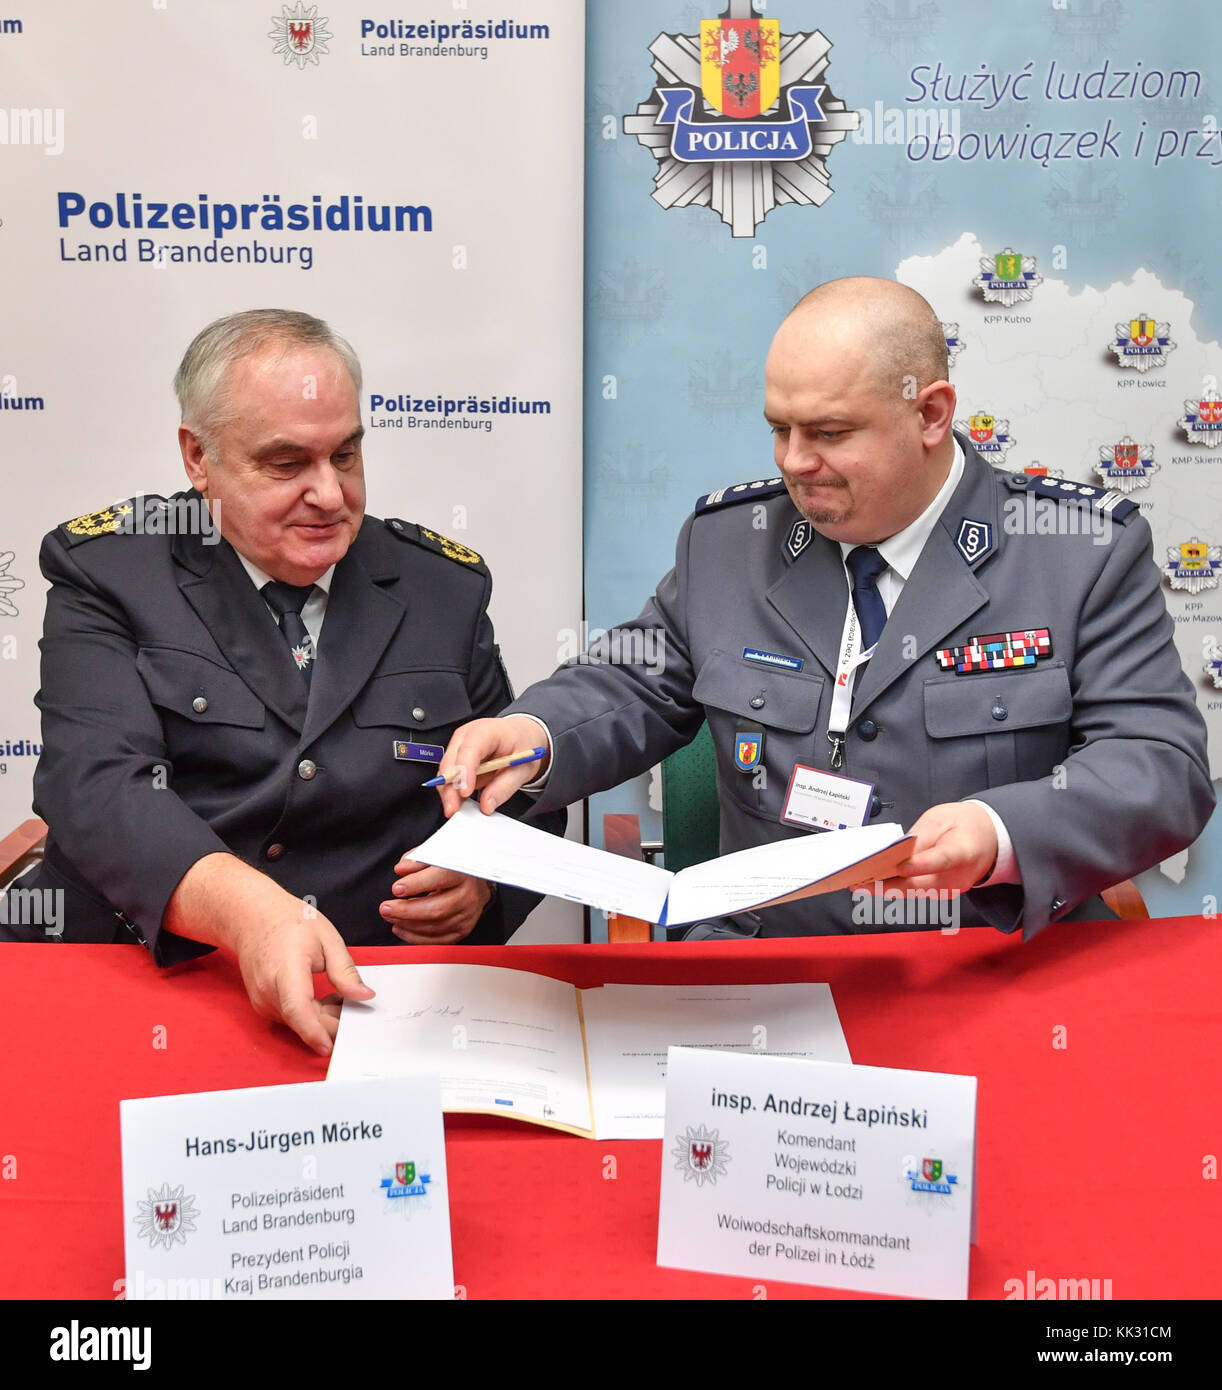 Kostrzyn, Poland. 29th Nov, 2017. The police president of the federal state Brandenburg, Hans-Juergen Moerke (L), and the voivodeship commander, Andrzej Lapinski from the Lodz police, sign a contract for the prevention of cyber criminality in Kostrzyn, Poland, 29 November 2017. The police headquarters of the federal state Brandenburg and the voivodeship Gorzow police are taking part in the joint border symposium 2017 under the motto "collaboration without borders". Credit: Patrick Pleul/dpa-Zentralbild/dpa/Alamy Live News Stock Photo